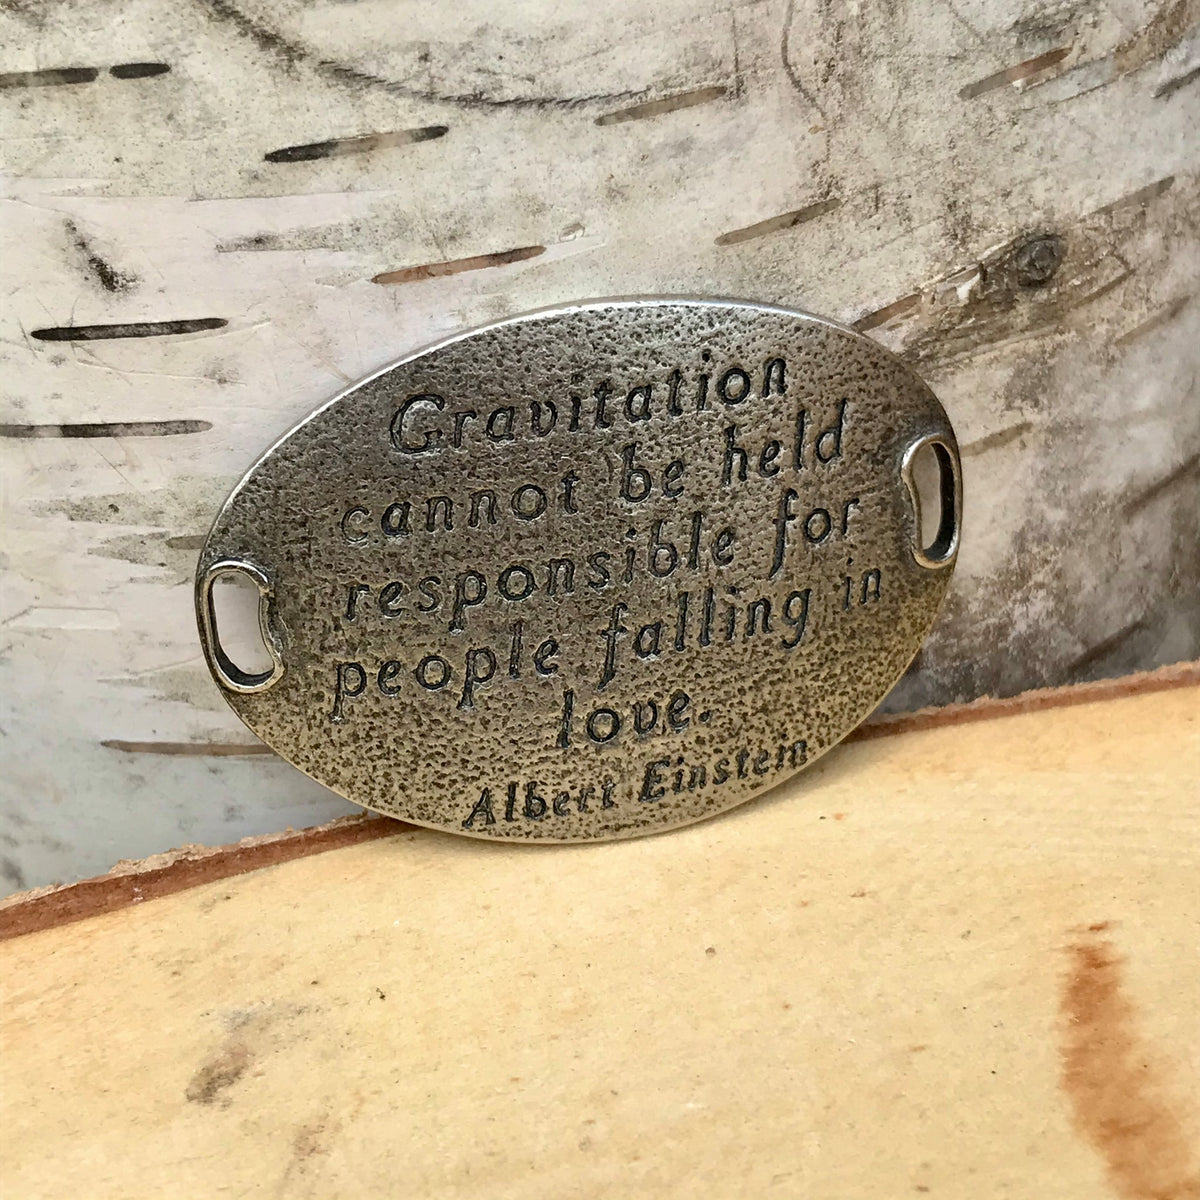 "Gravitation cannot be held responsible for people falling in love." -Albert Einstein (silver)